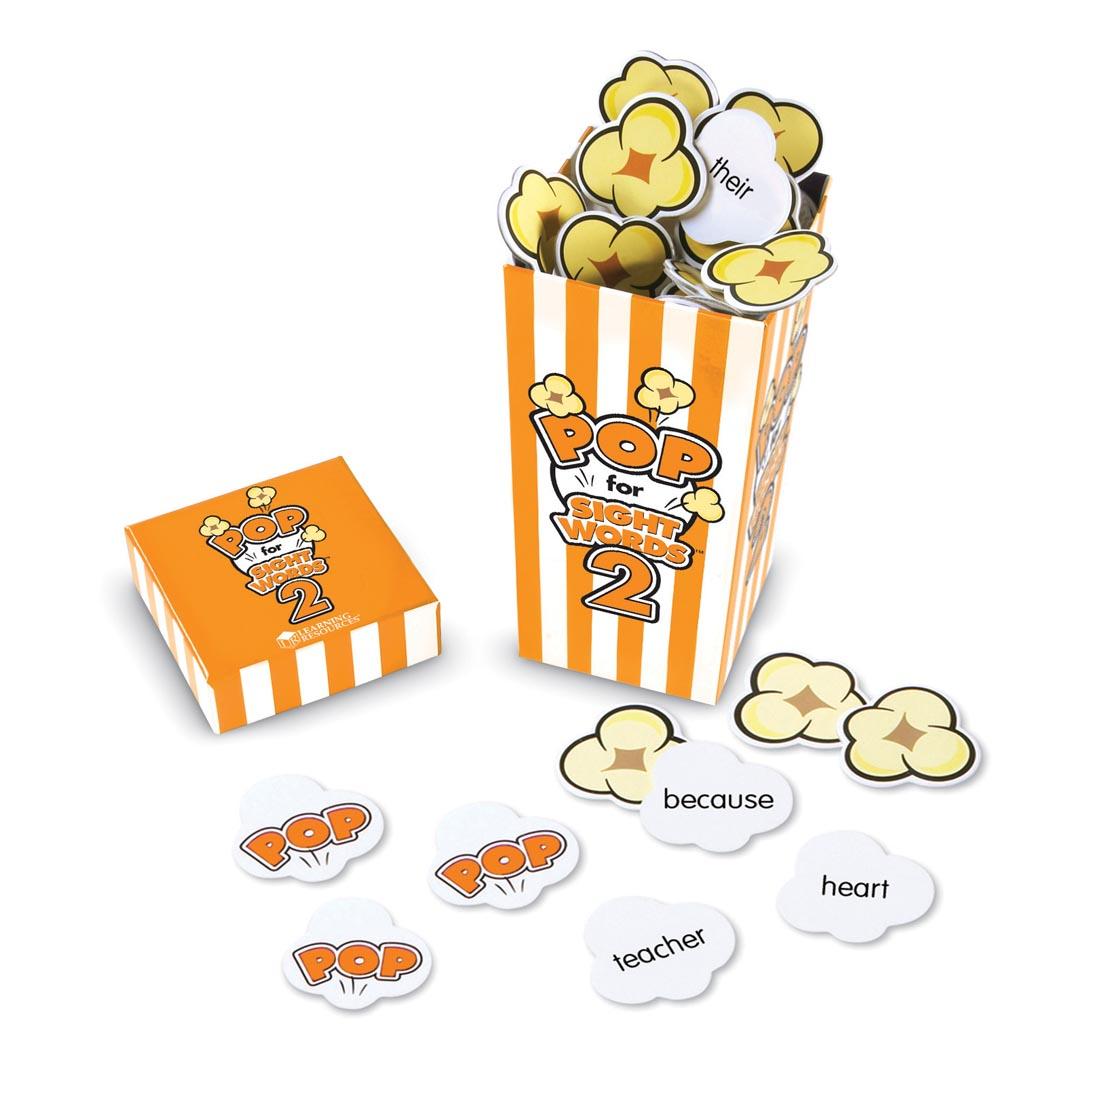 popcorn-shaped cards with sight words on them, in a yellow and white striped box